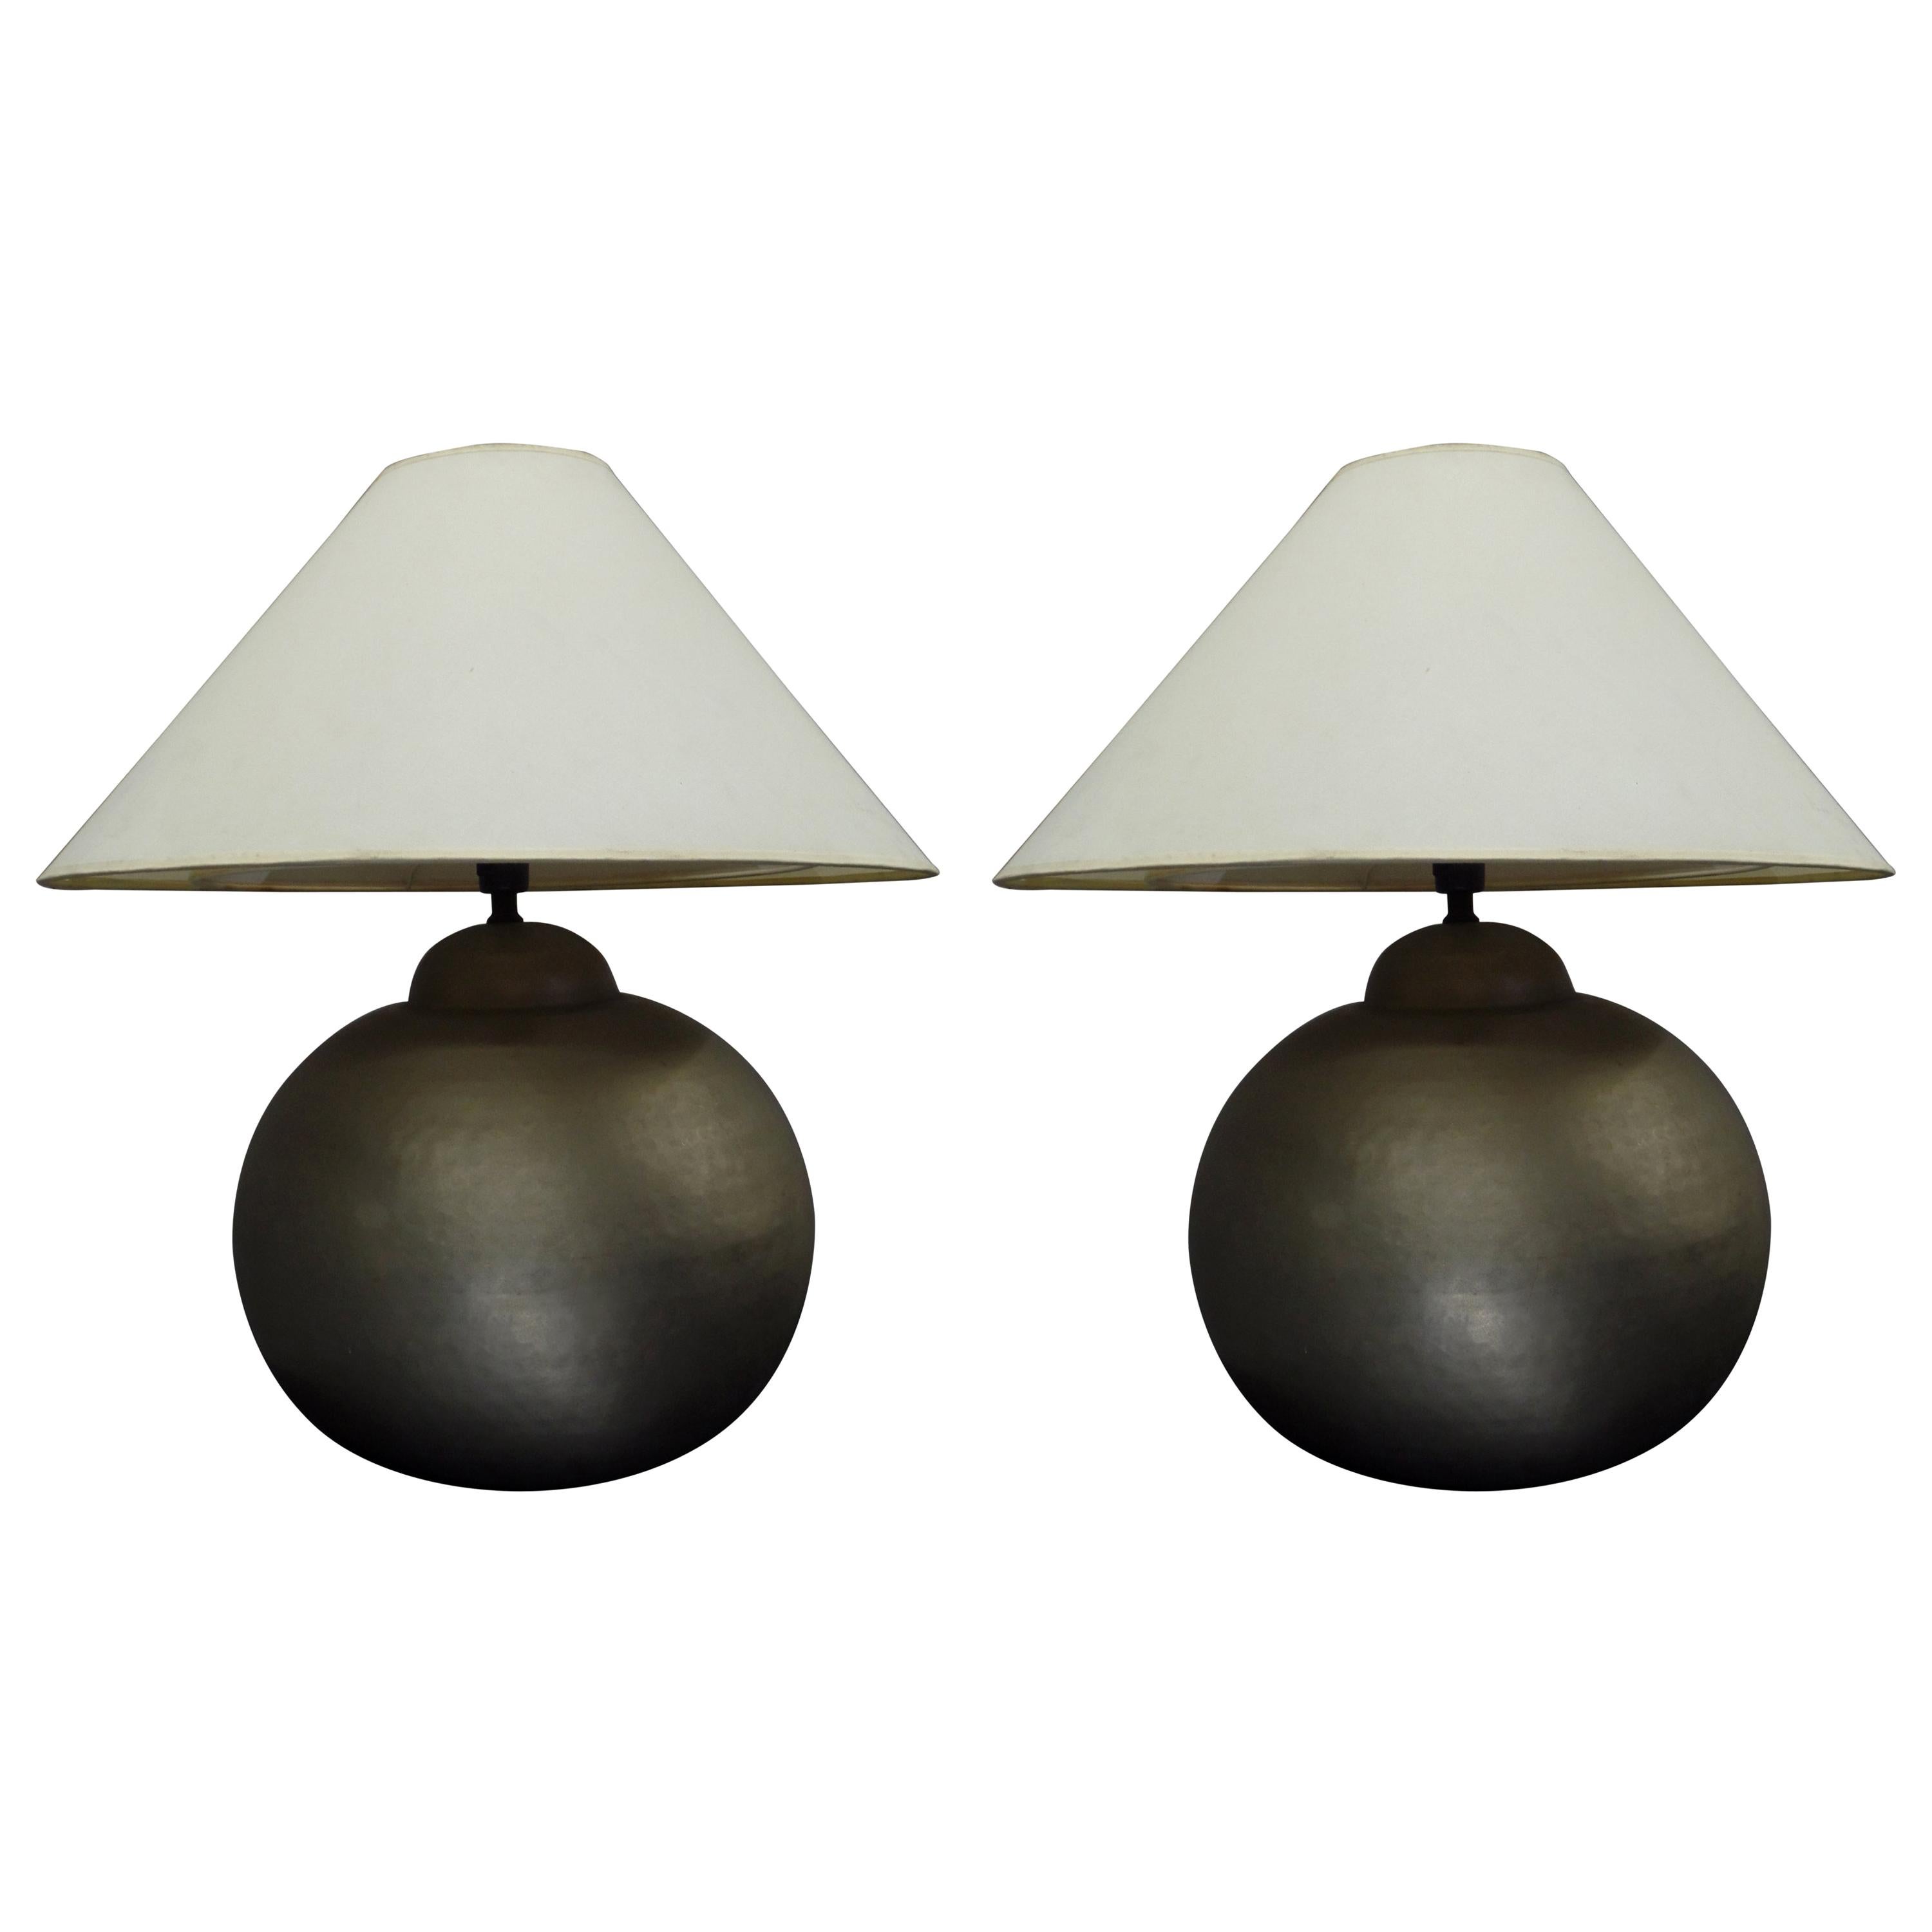 Pair of French Hand-Hammered Brass & Matte Nickel Table Lamps, Jean-Michel Frank